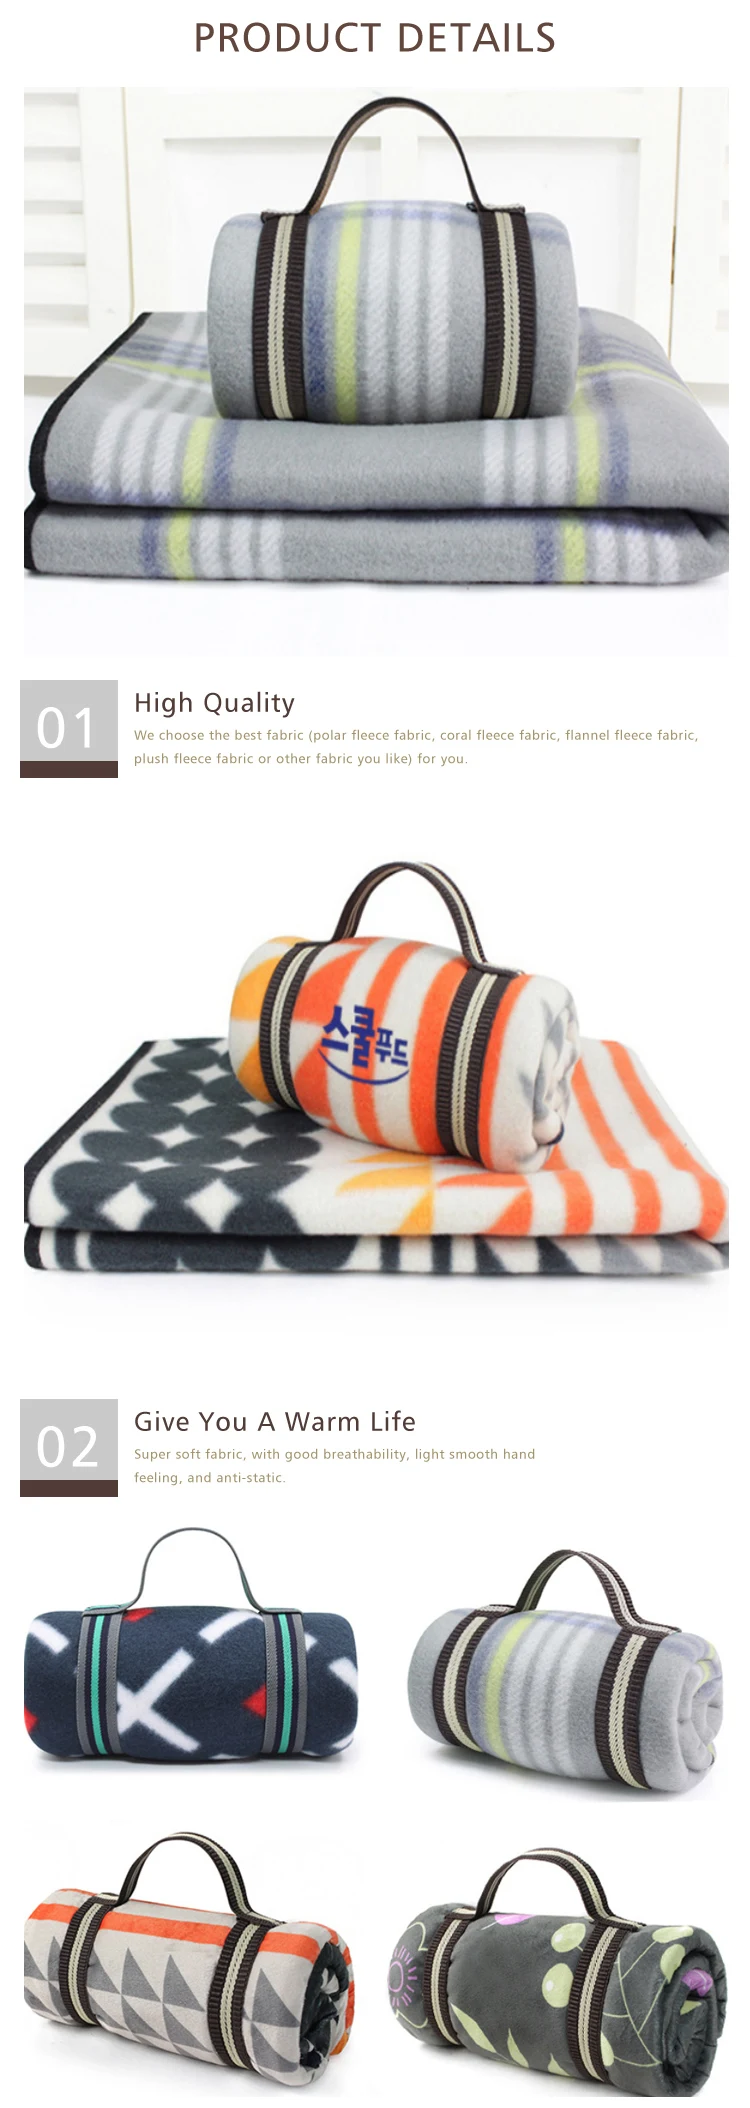 Factory sale cheap price new design printed plush fleece 2 in 1 pillow blanket